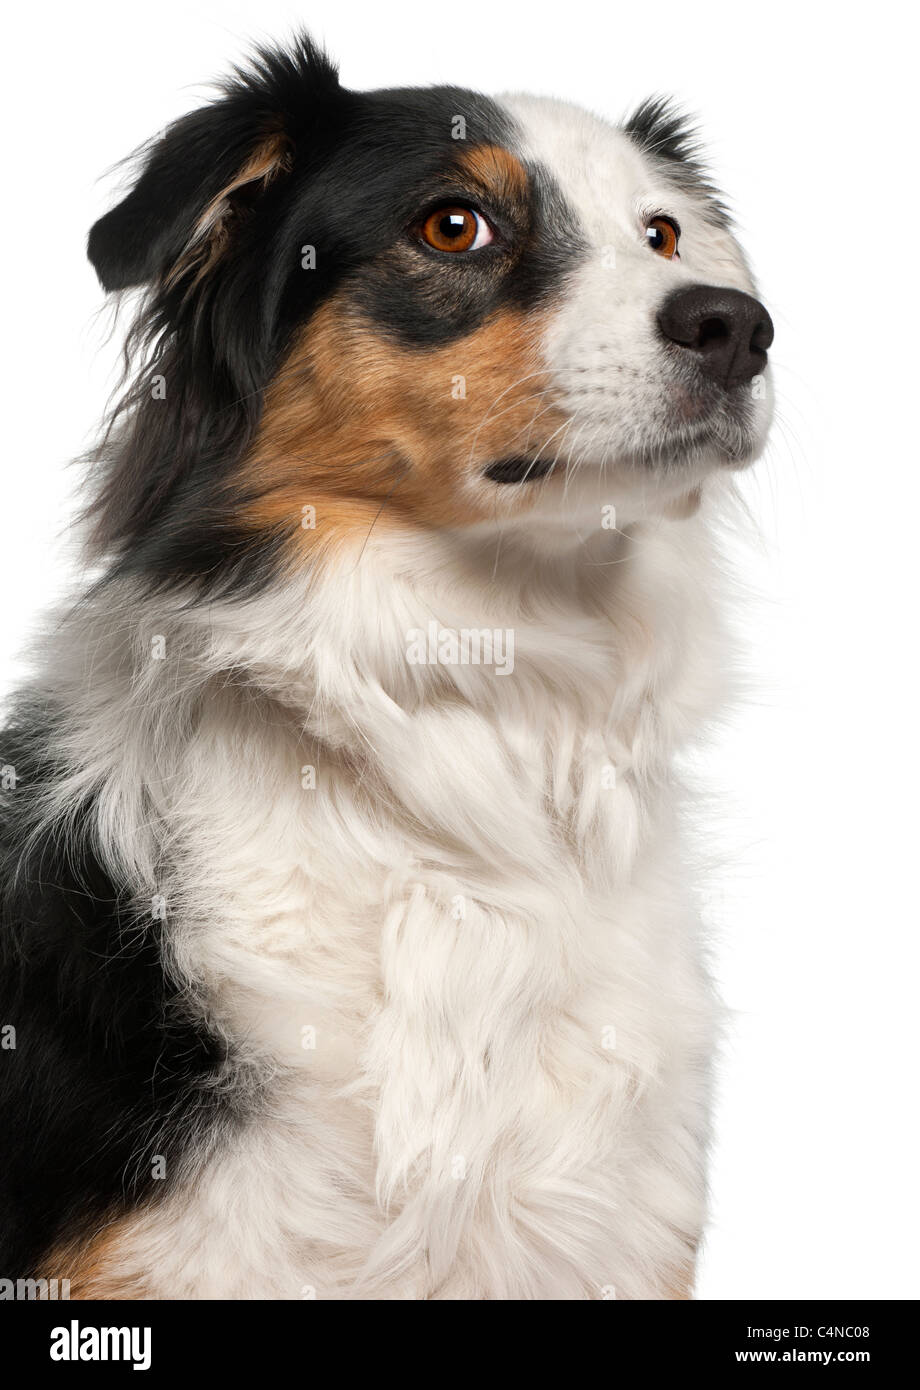 Close-up of Australian Shepherd dog, 6 years old, in front of white background Stock Photo